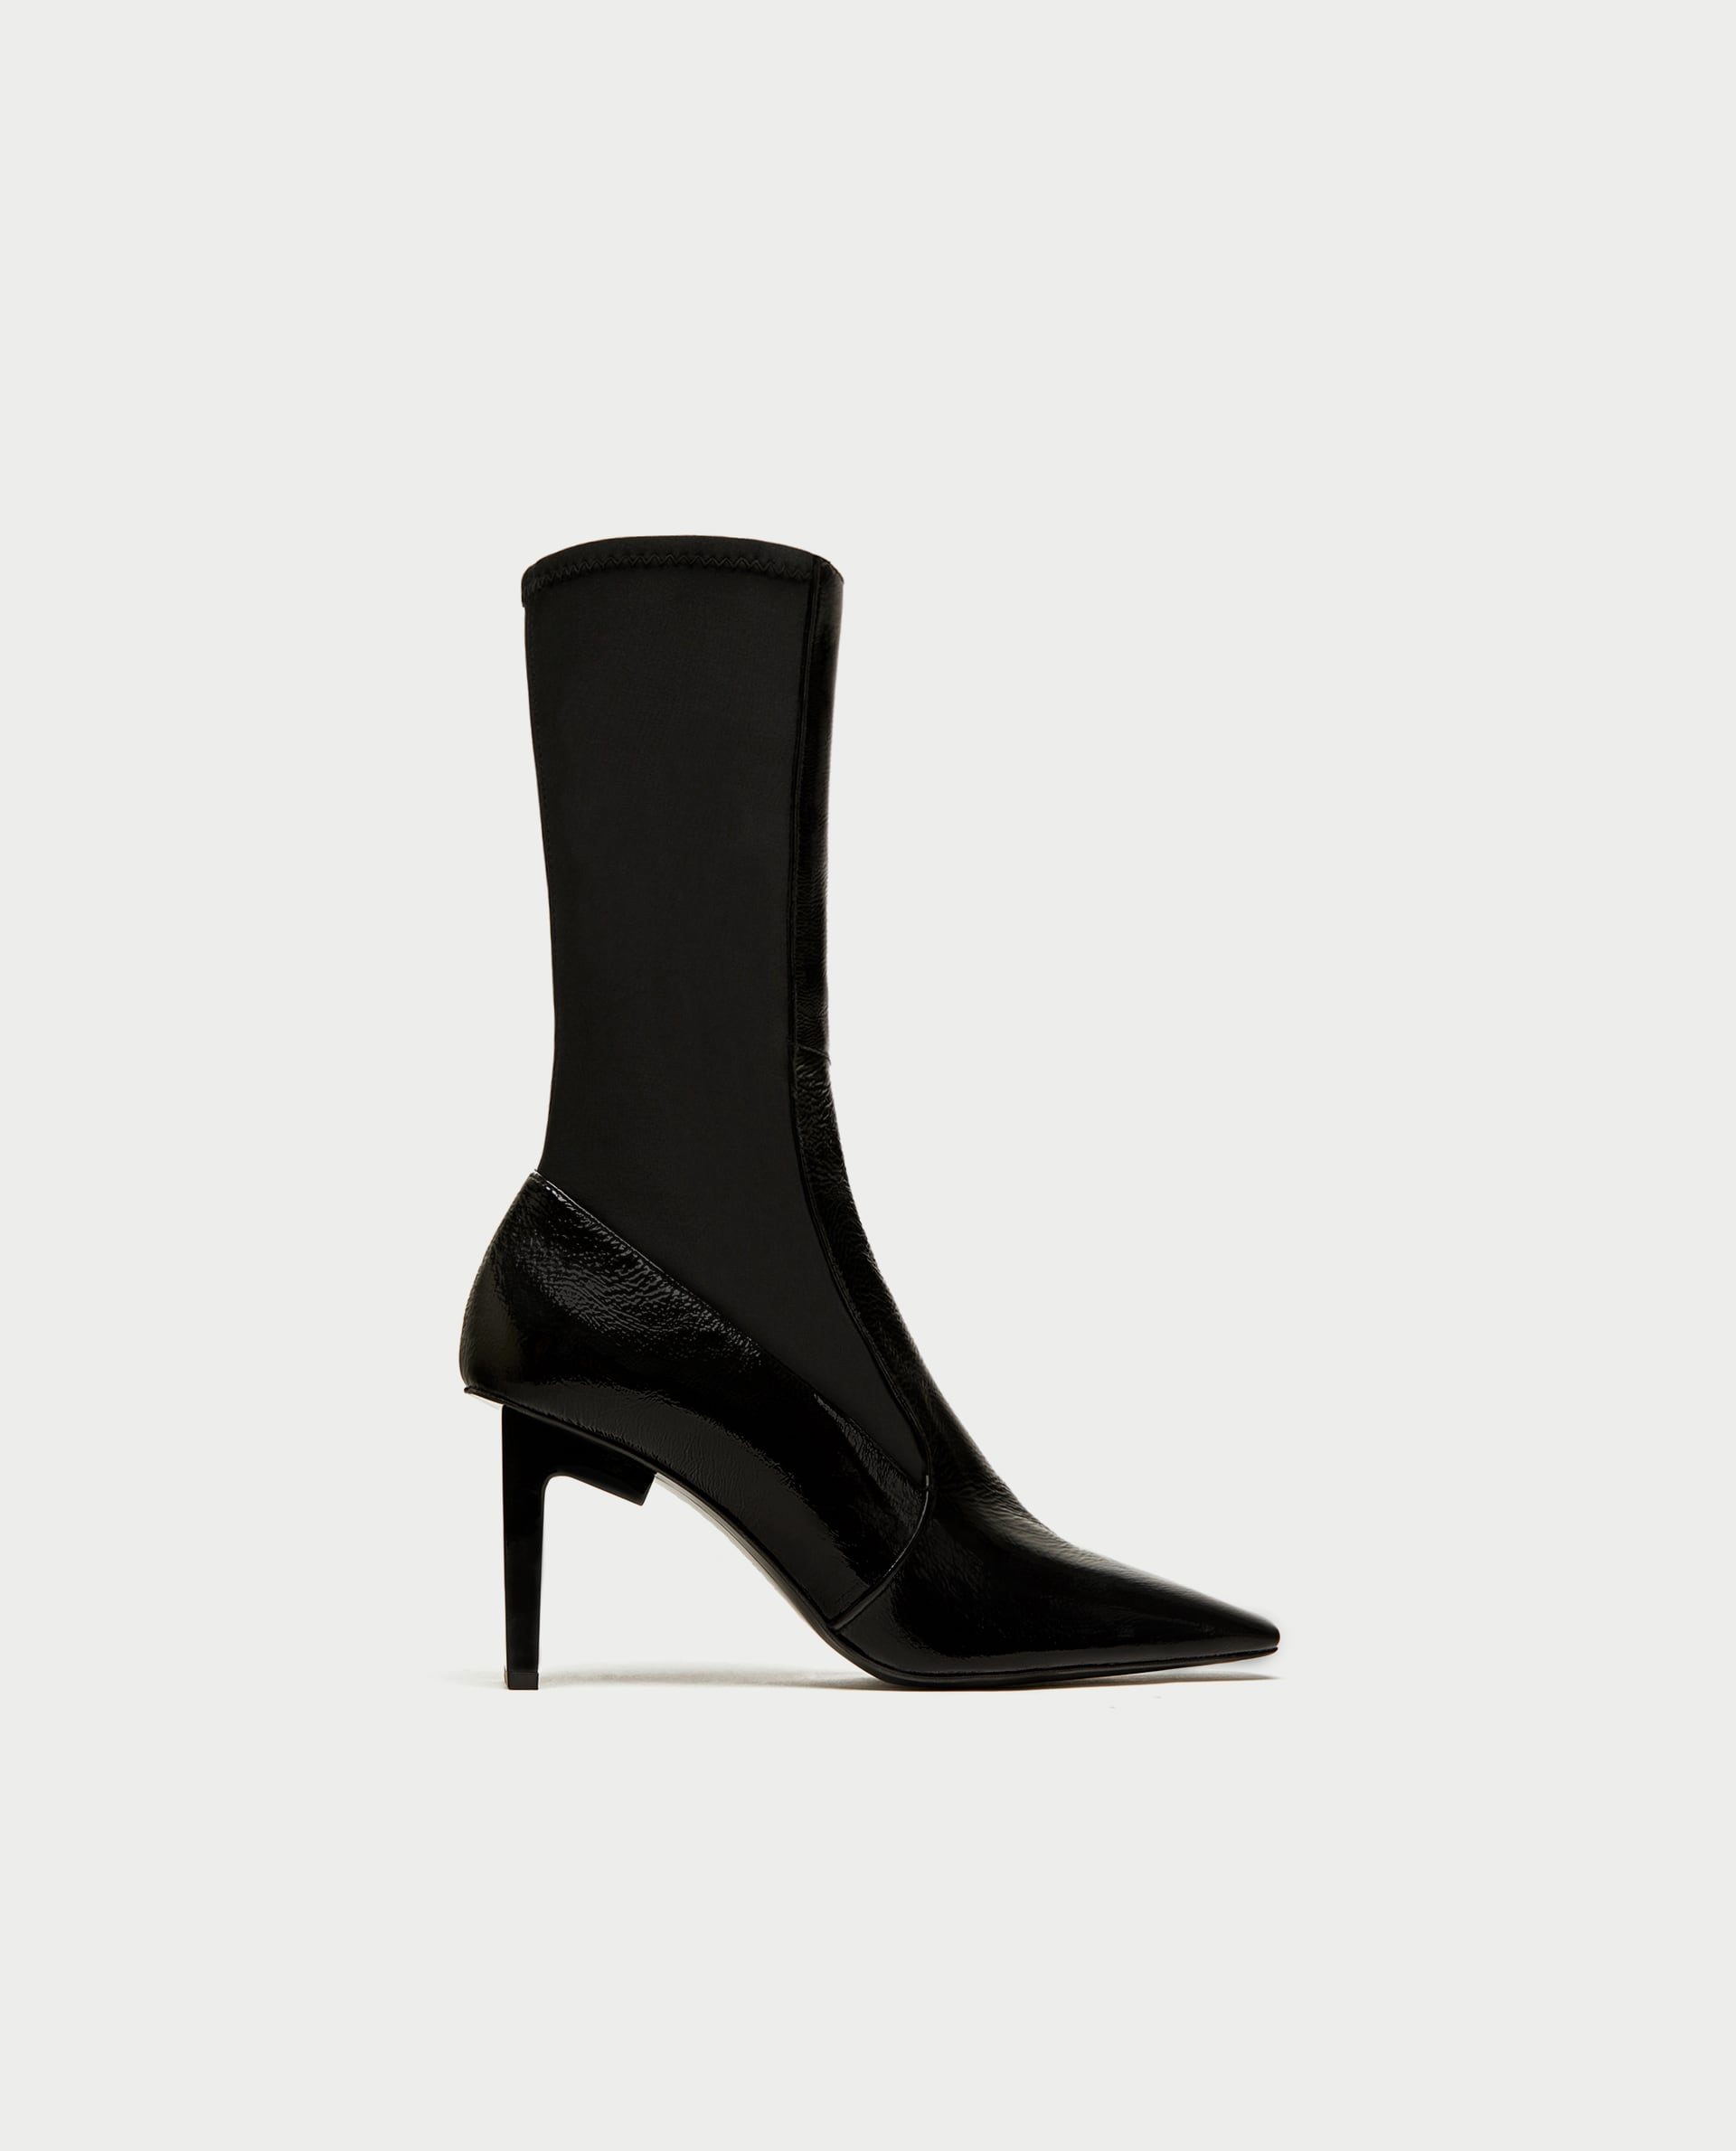 Square-toed high heel ankle boots (P1,995), Zara.com 